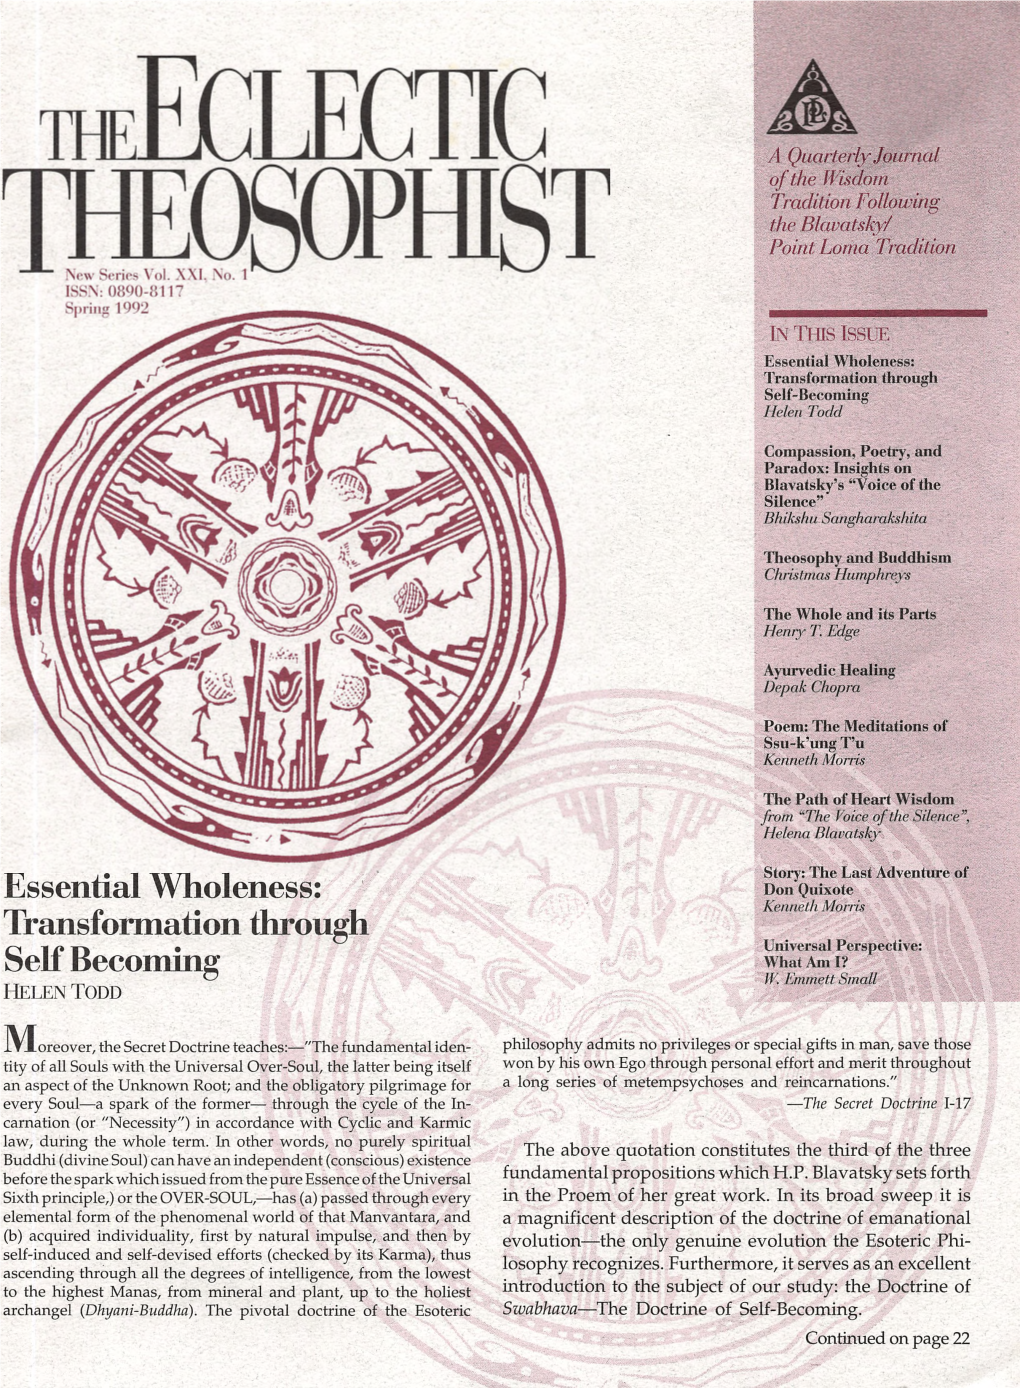 Eclectic Theosophist Ns V21 N1 Spring 1992